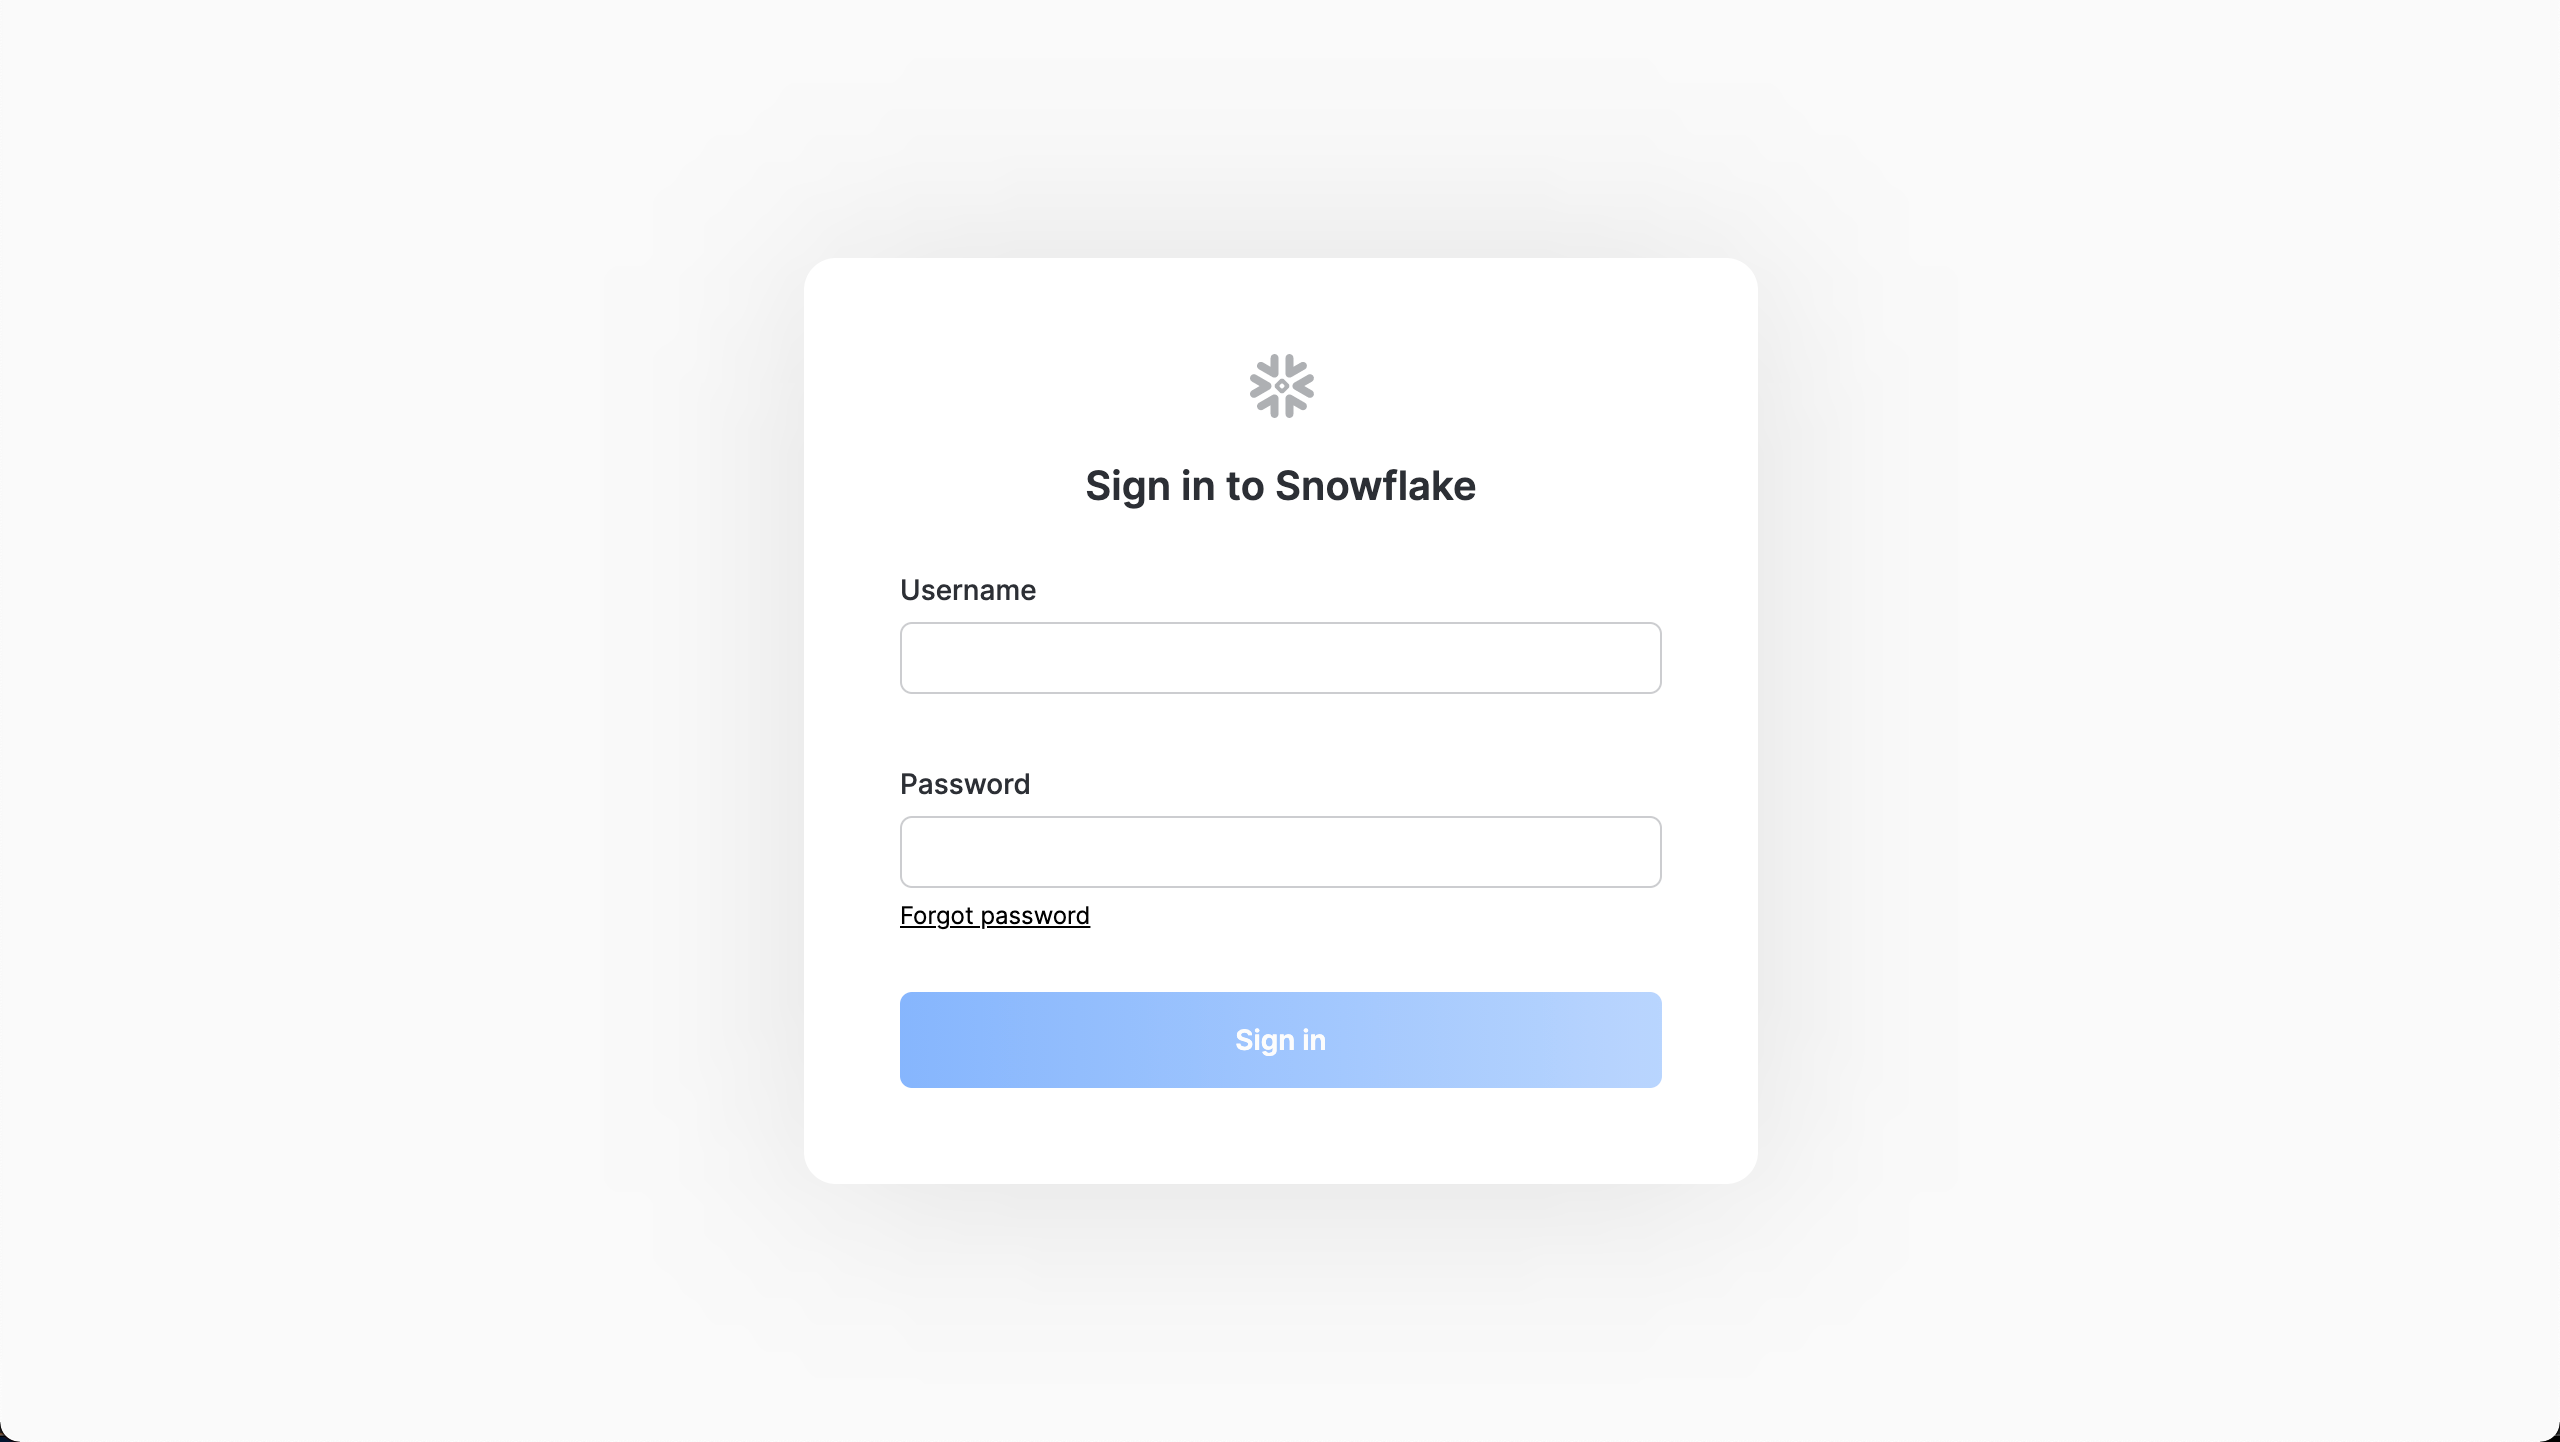 ../../_images/sign-in-snowflake.png